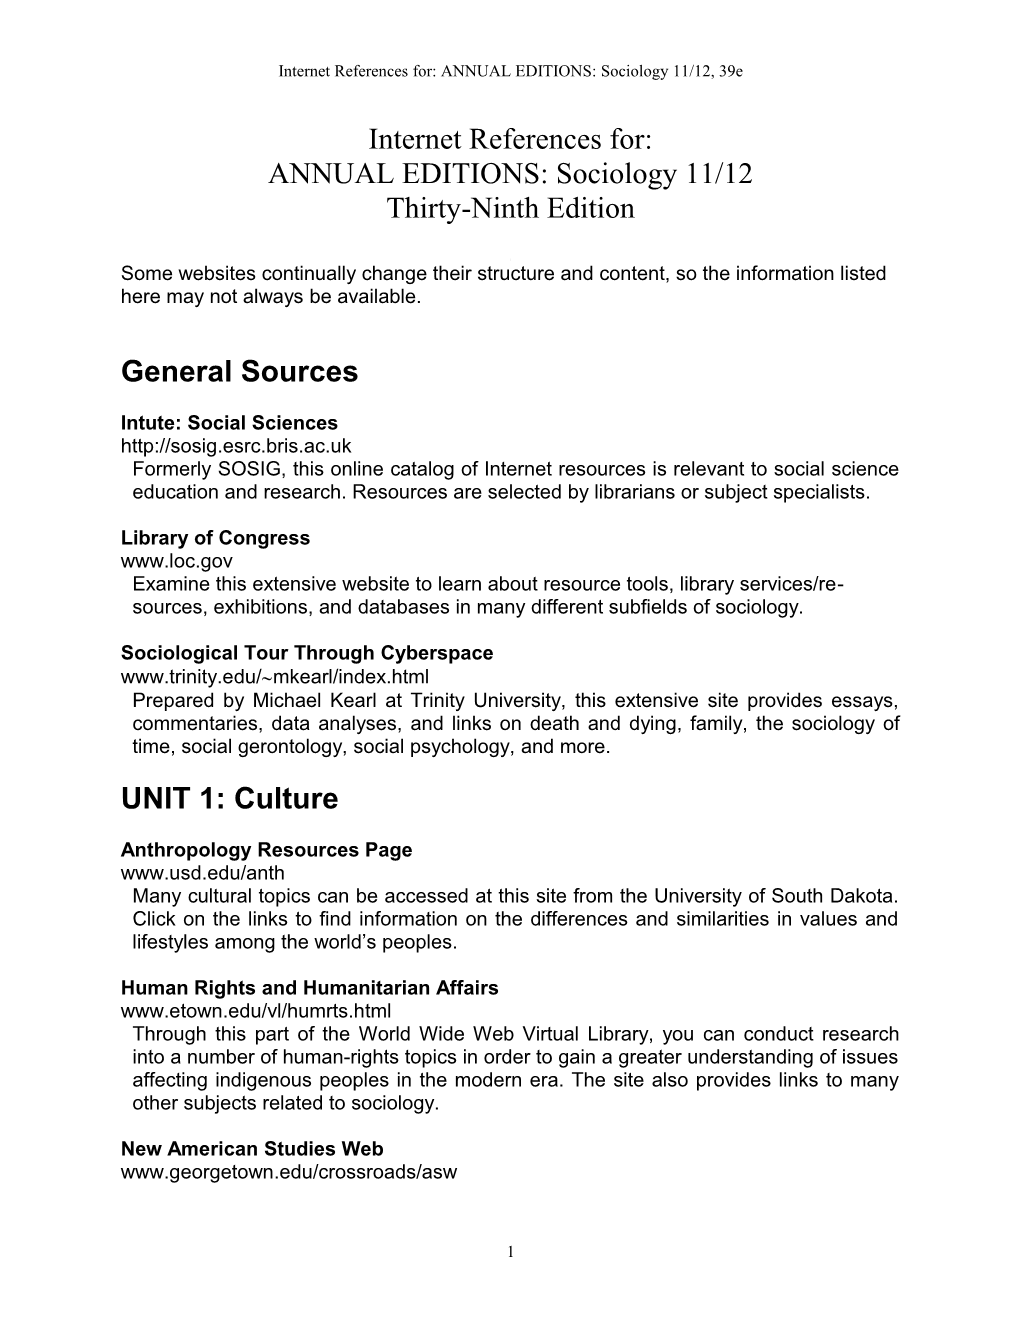 Internet References For: ANNUAL EDITIONS: Sociology 11/12, 39E